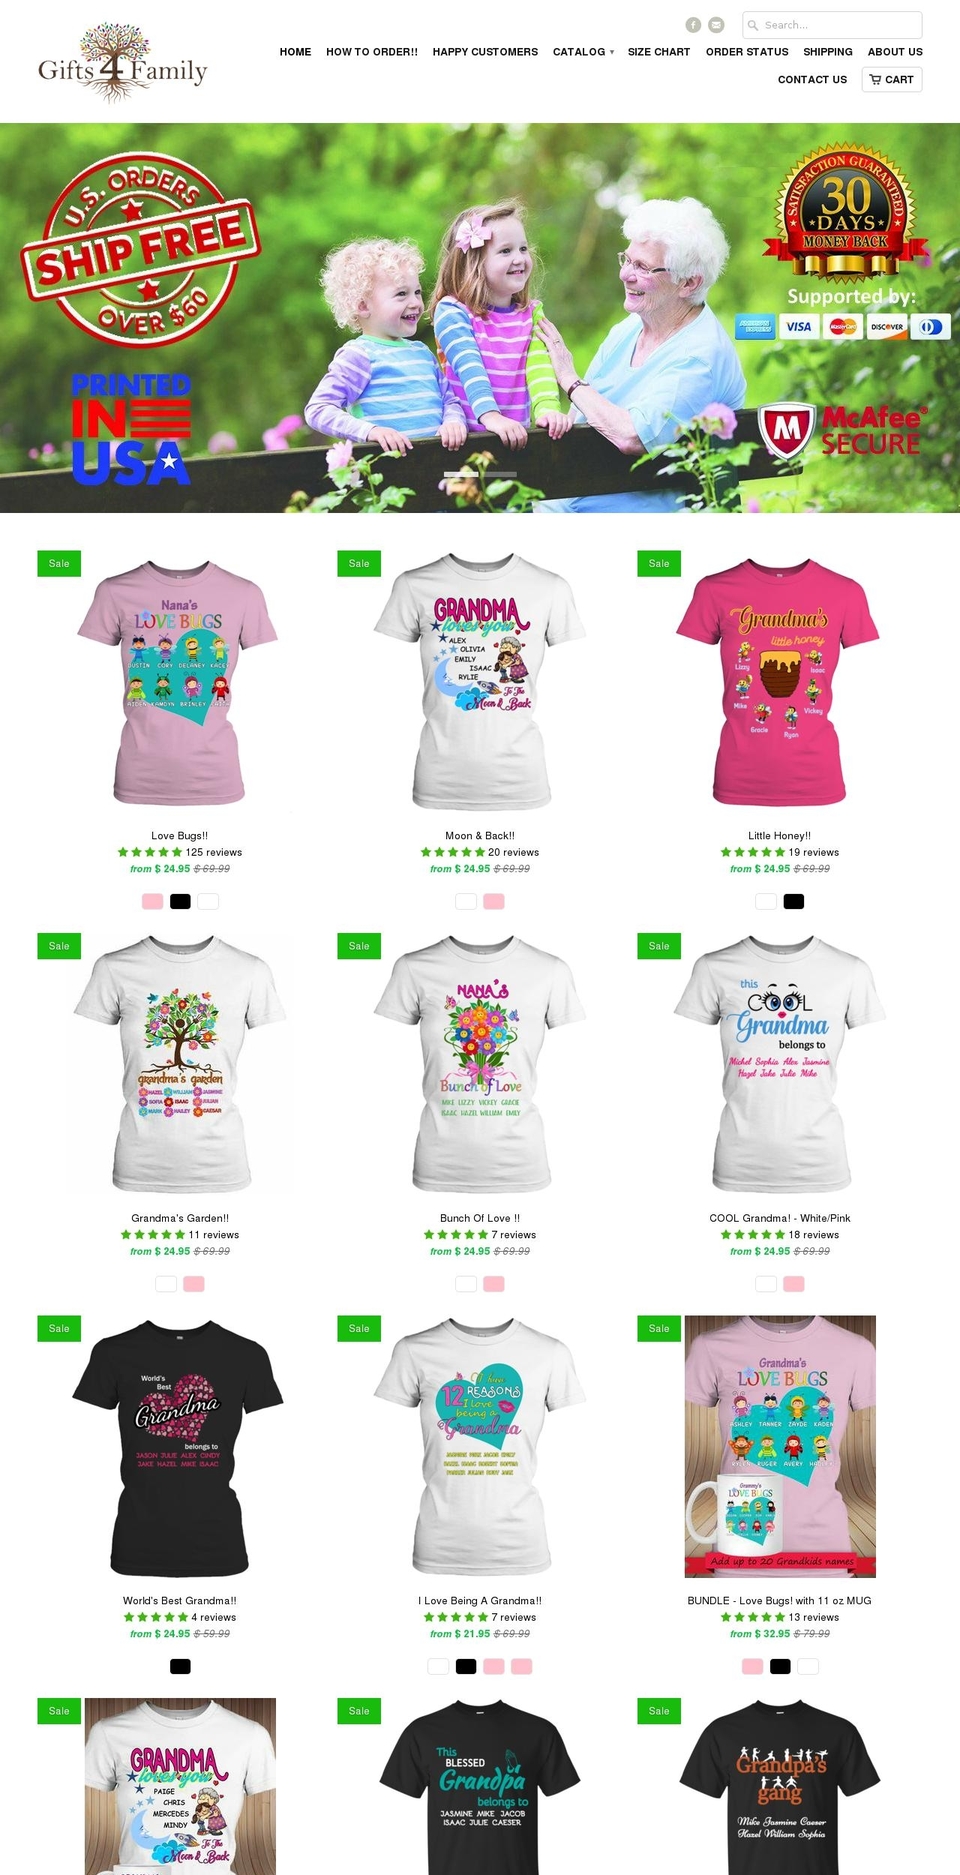 Kalles Shopify theme site example gifts4family.com